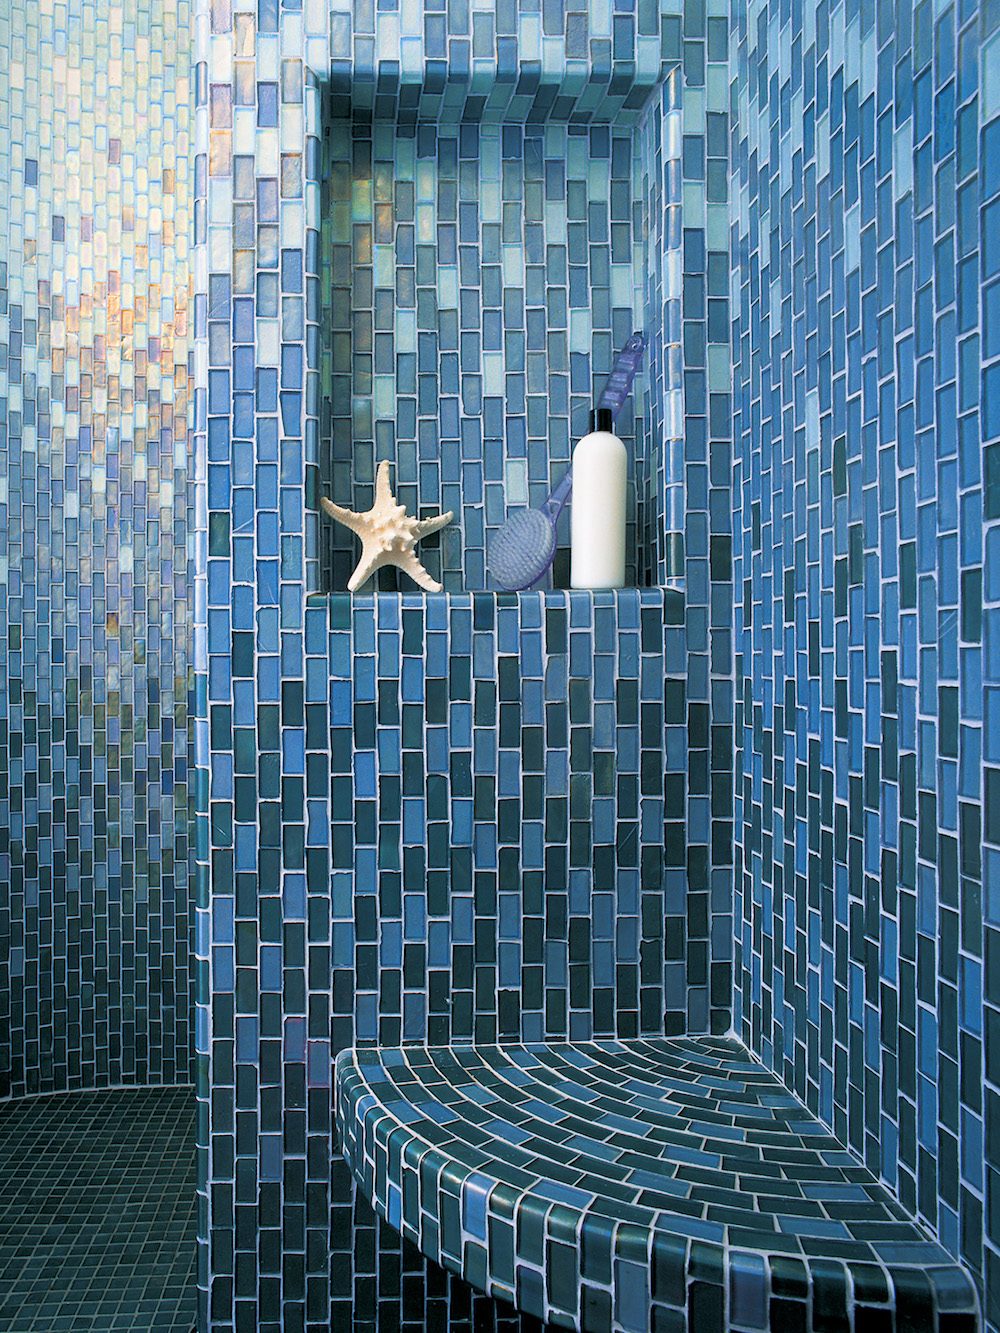 blue ombre tile bathroom with recessed wall nook for shampoo